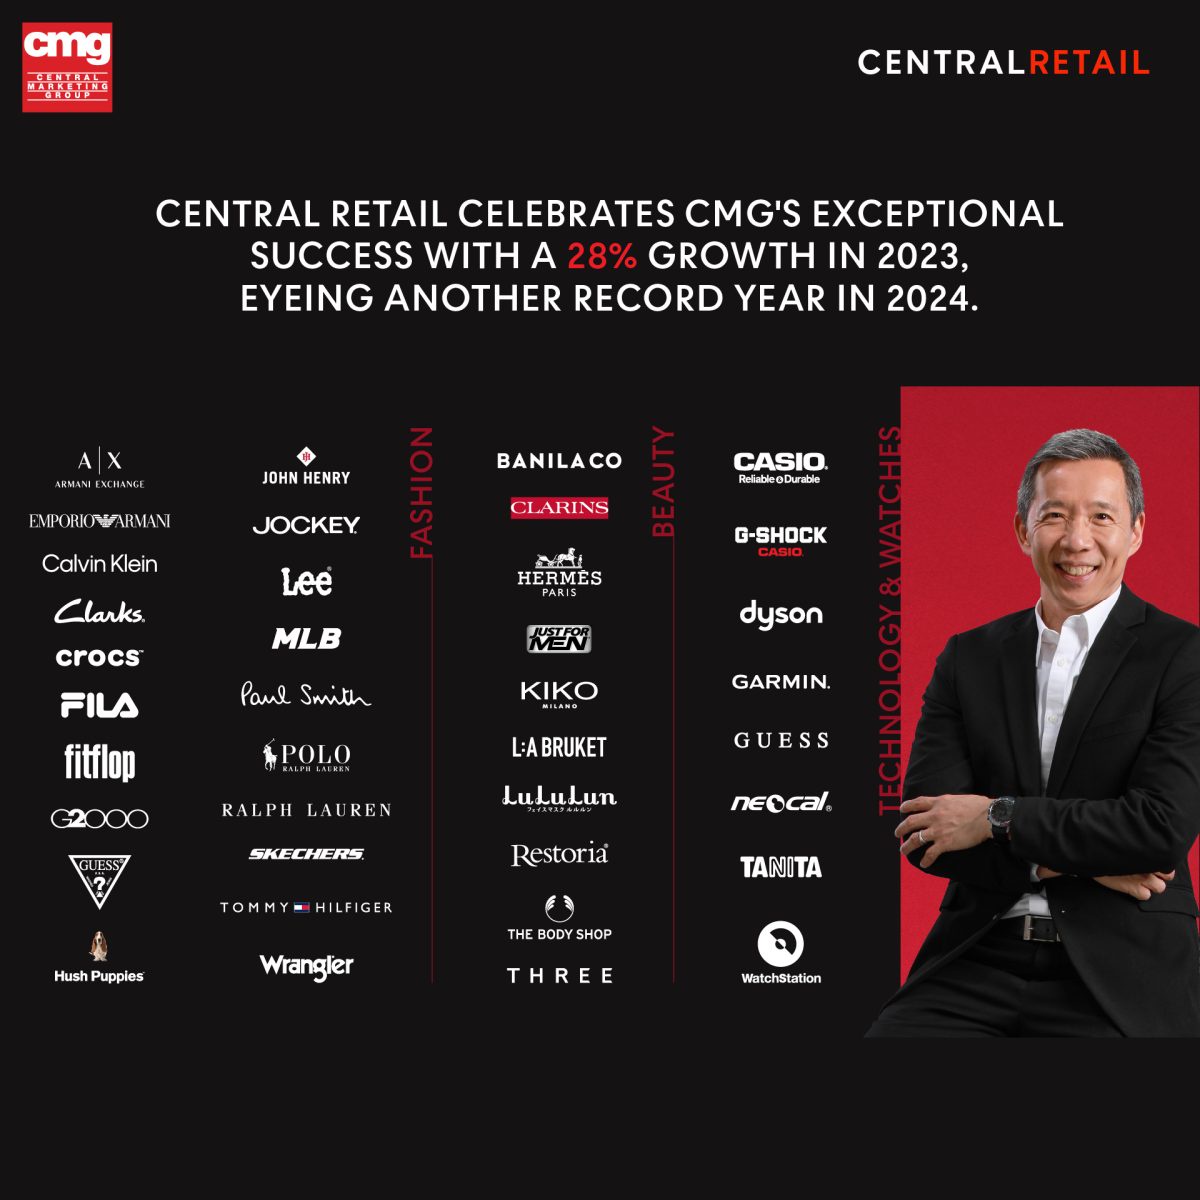 Central Retail celebrates CMG's exceptional success with a 28% growth in 2023, eyeing another record year in 2024